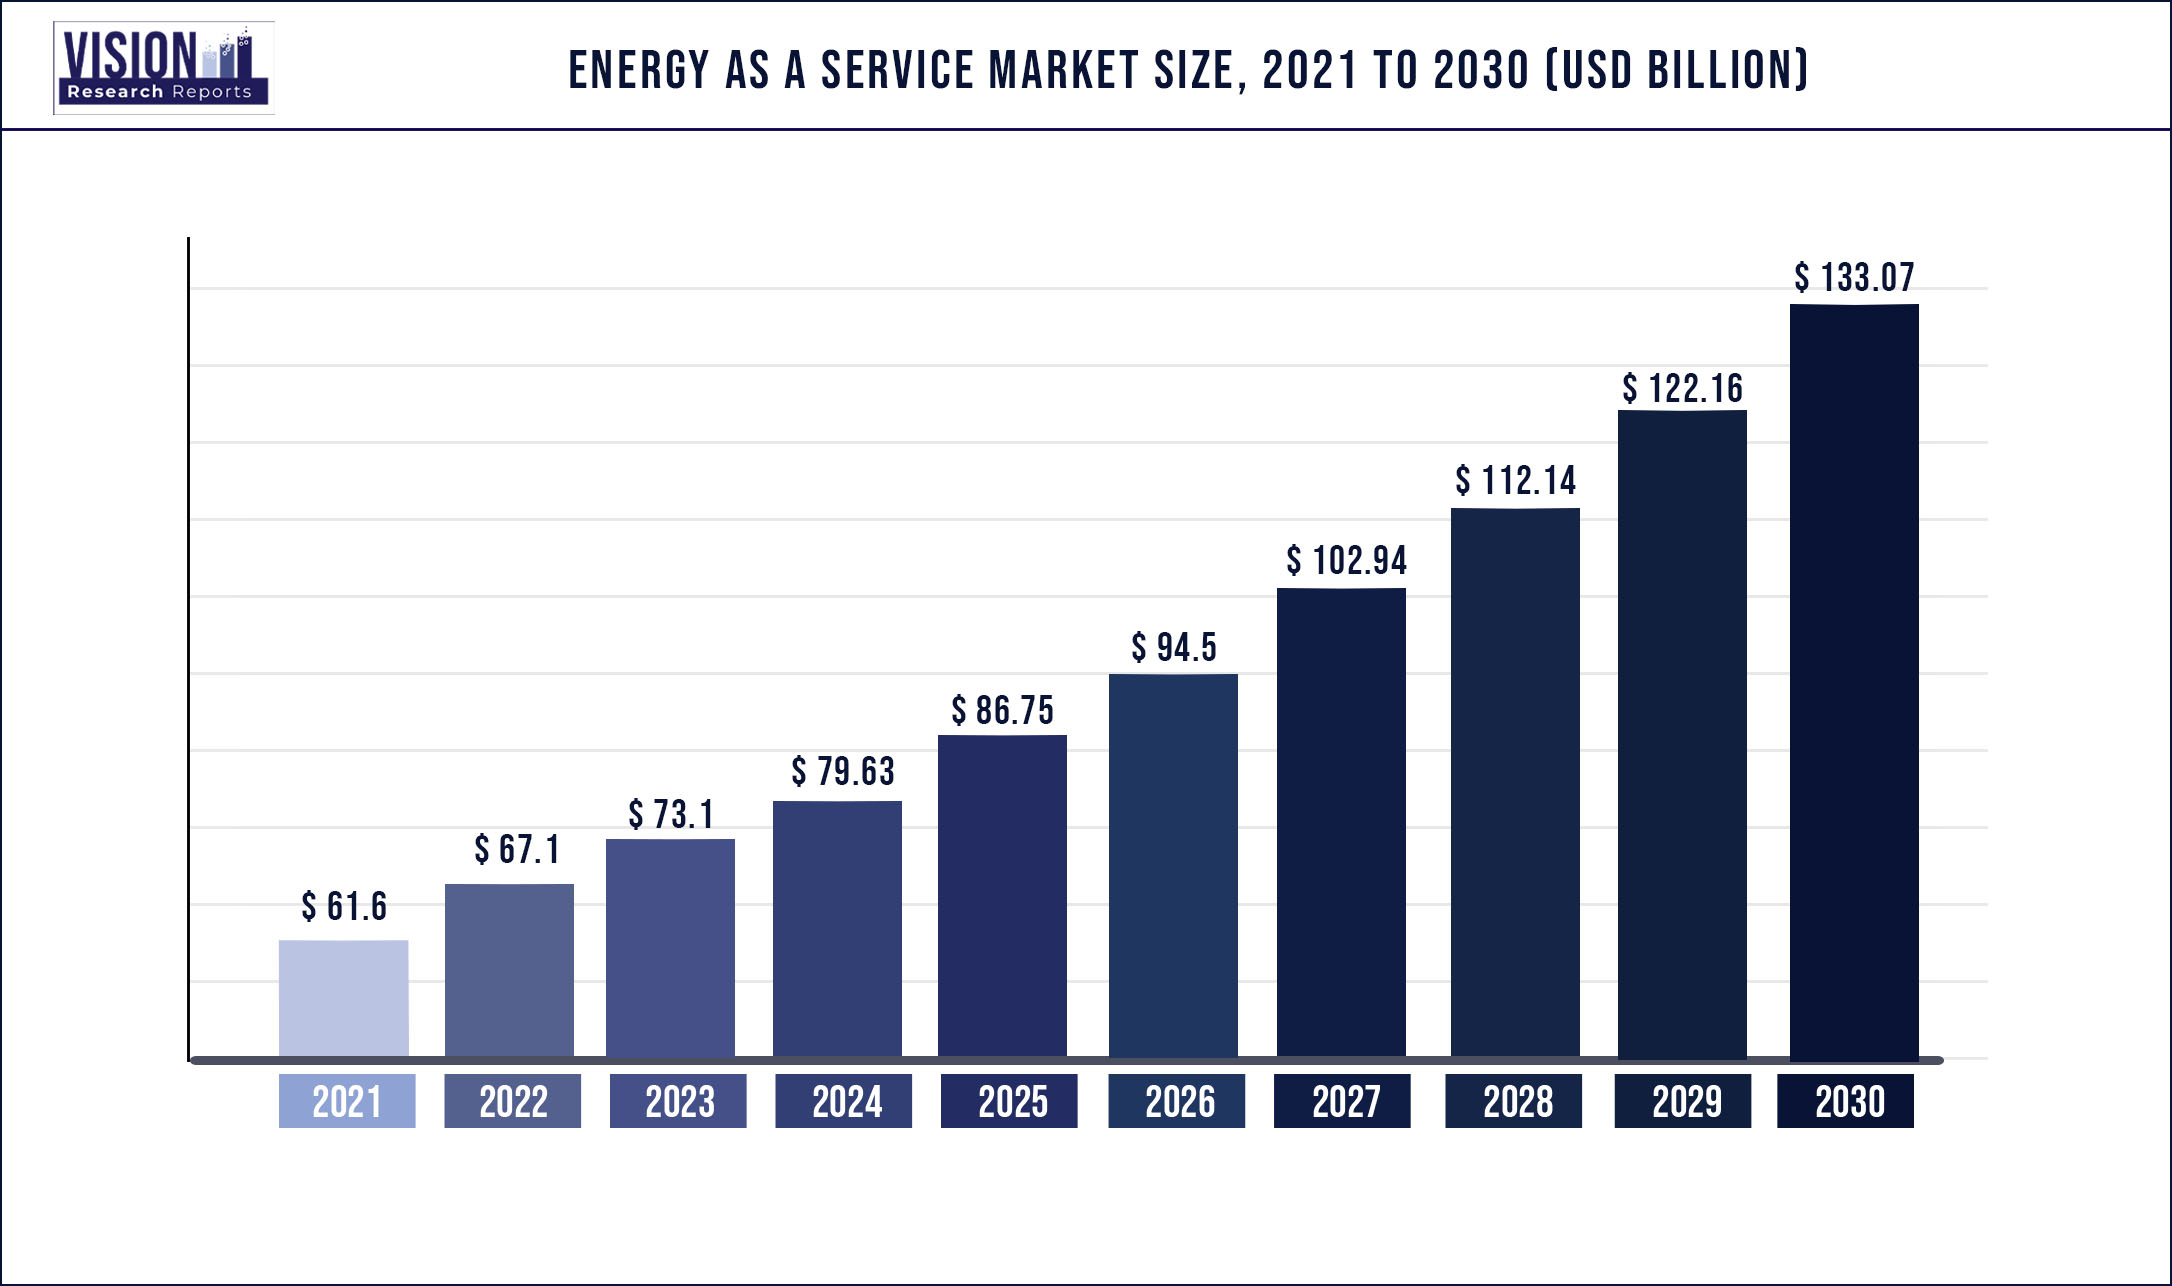 Energy As A Service Market Size 2021 to 2030